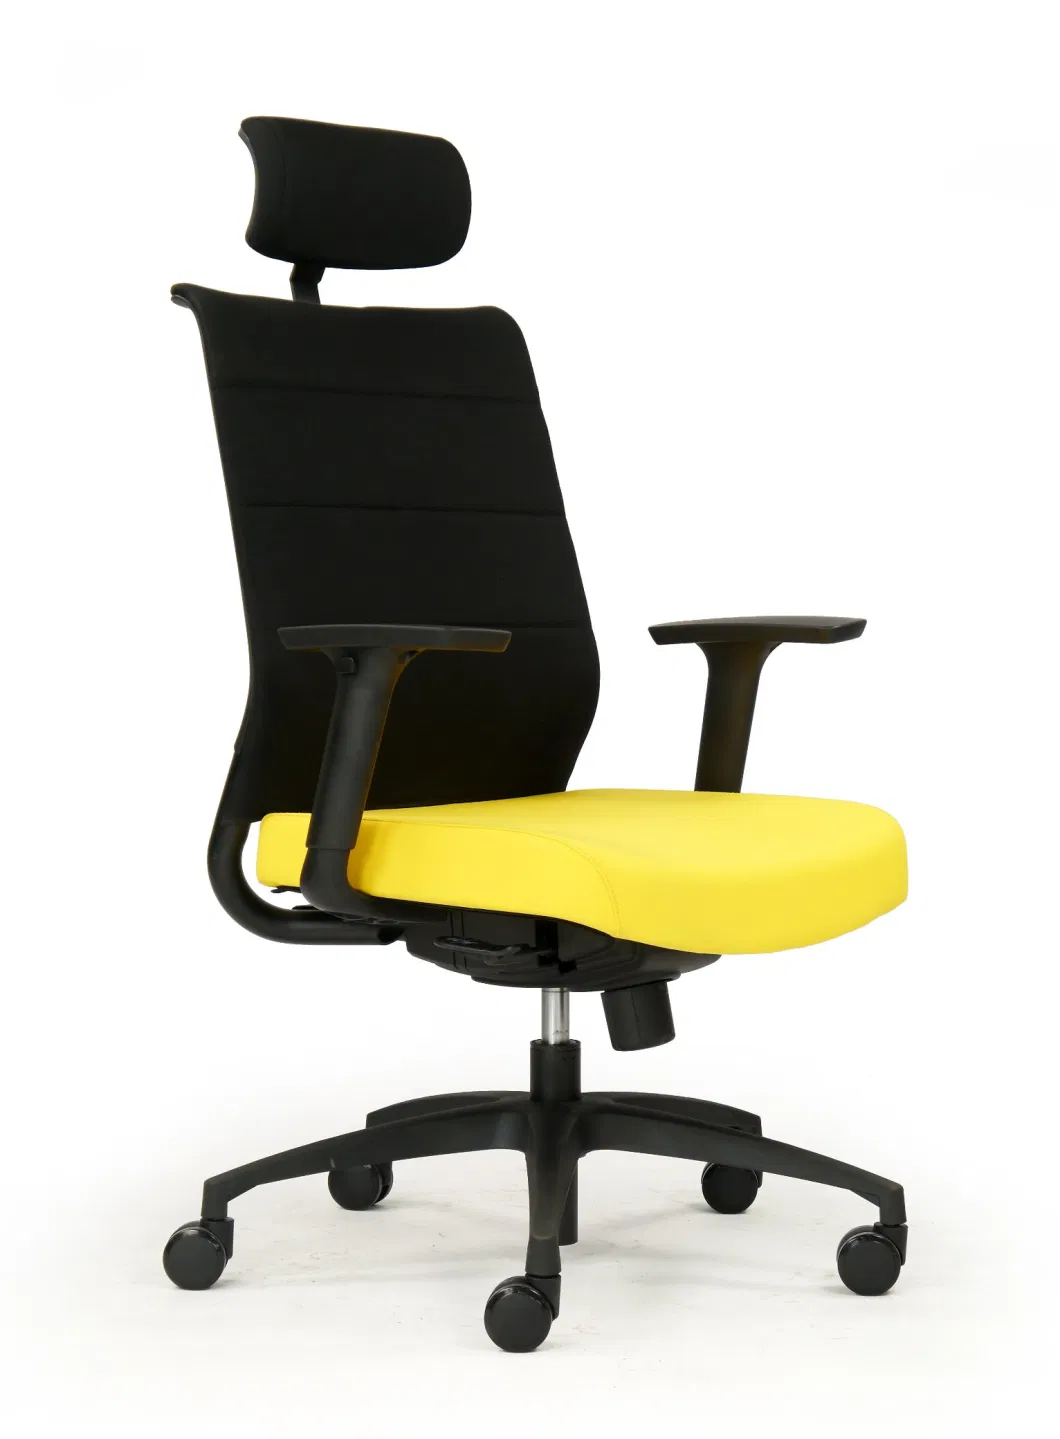 Commercial Furniture High End Adjustable Swivel Office Chair